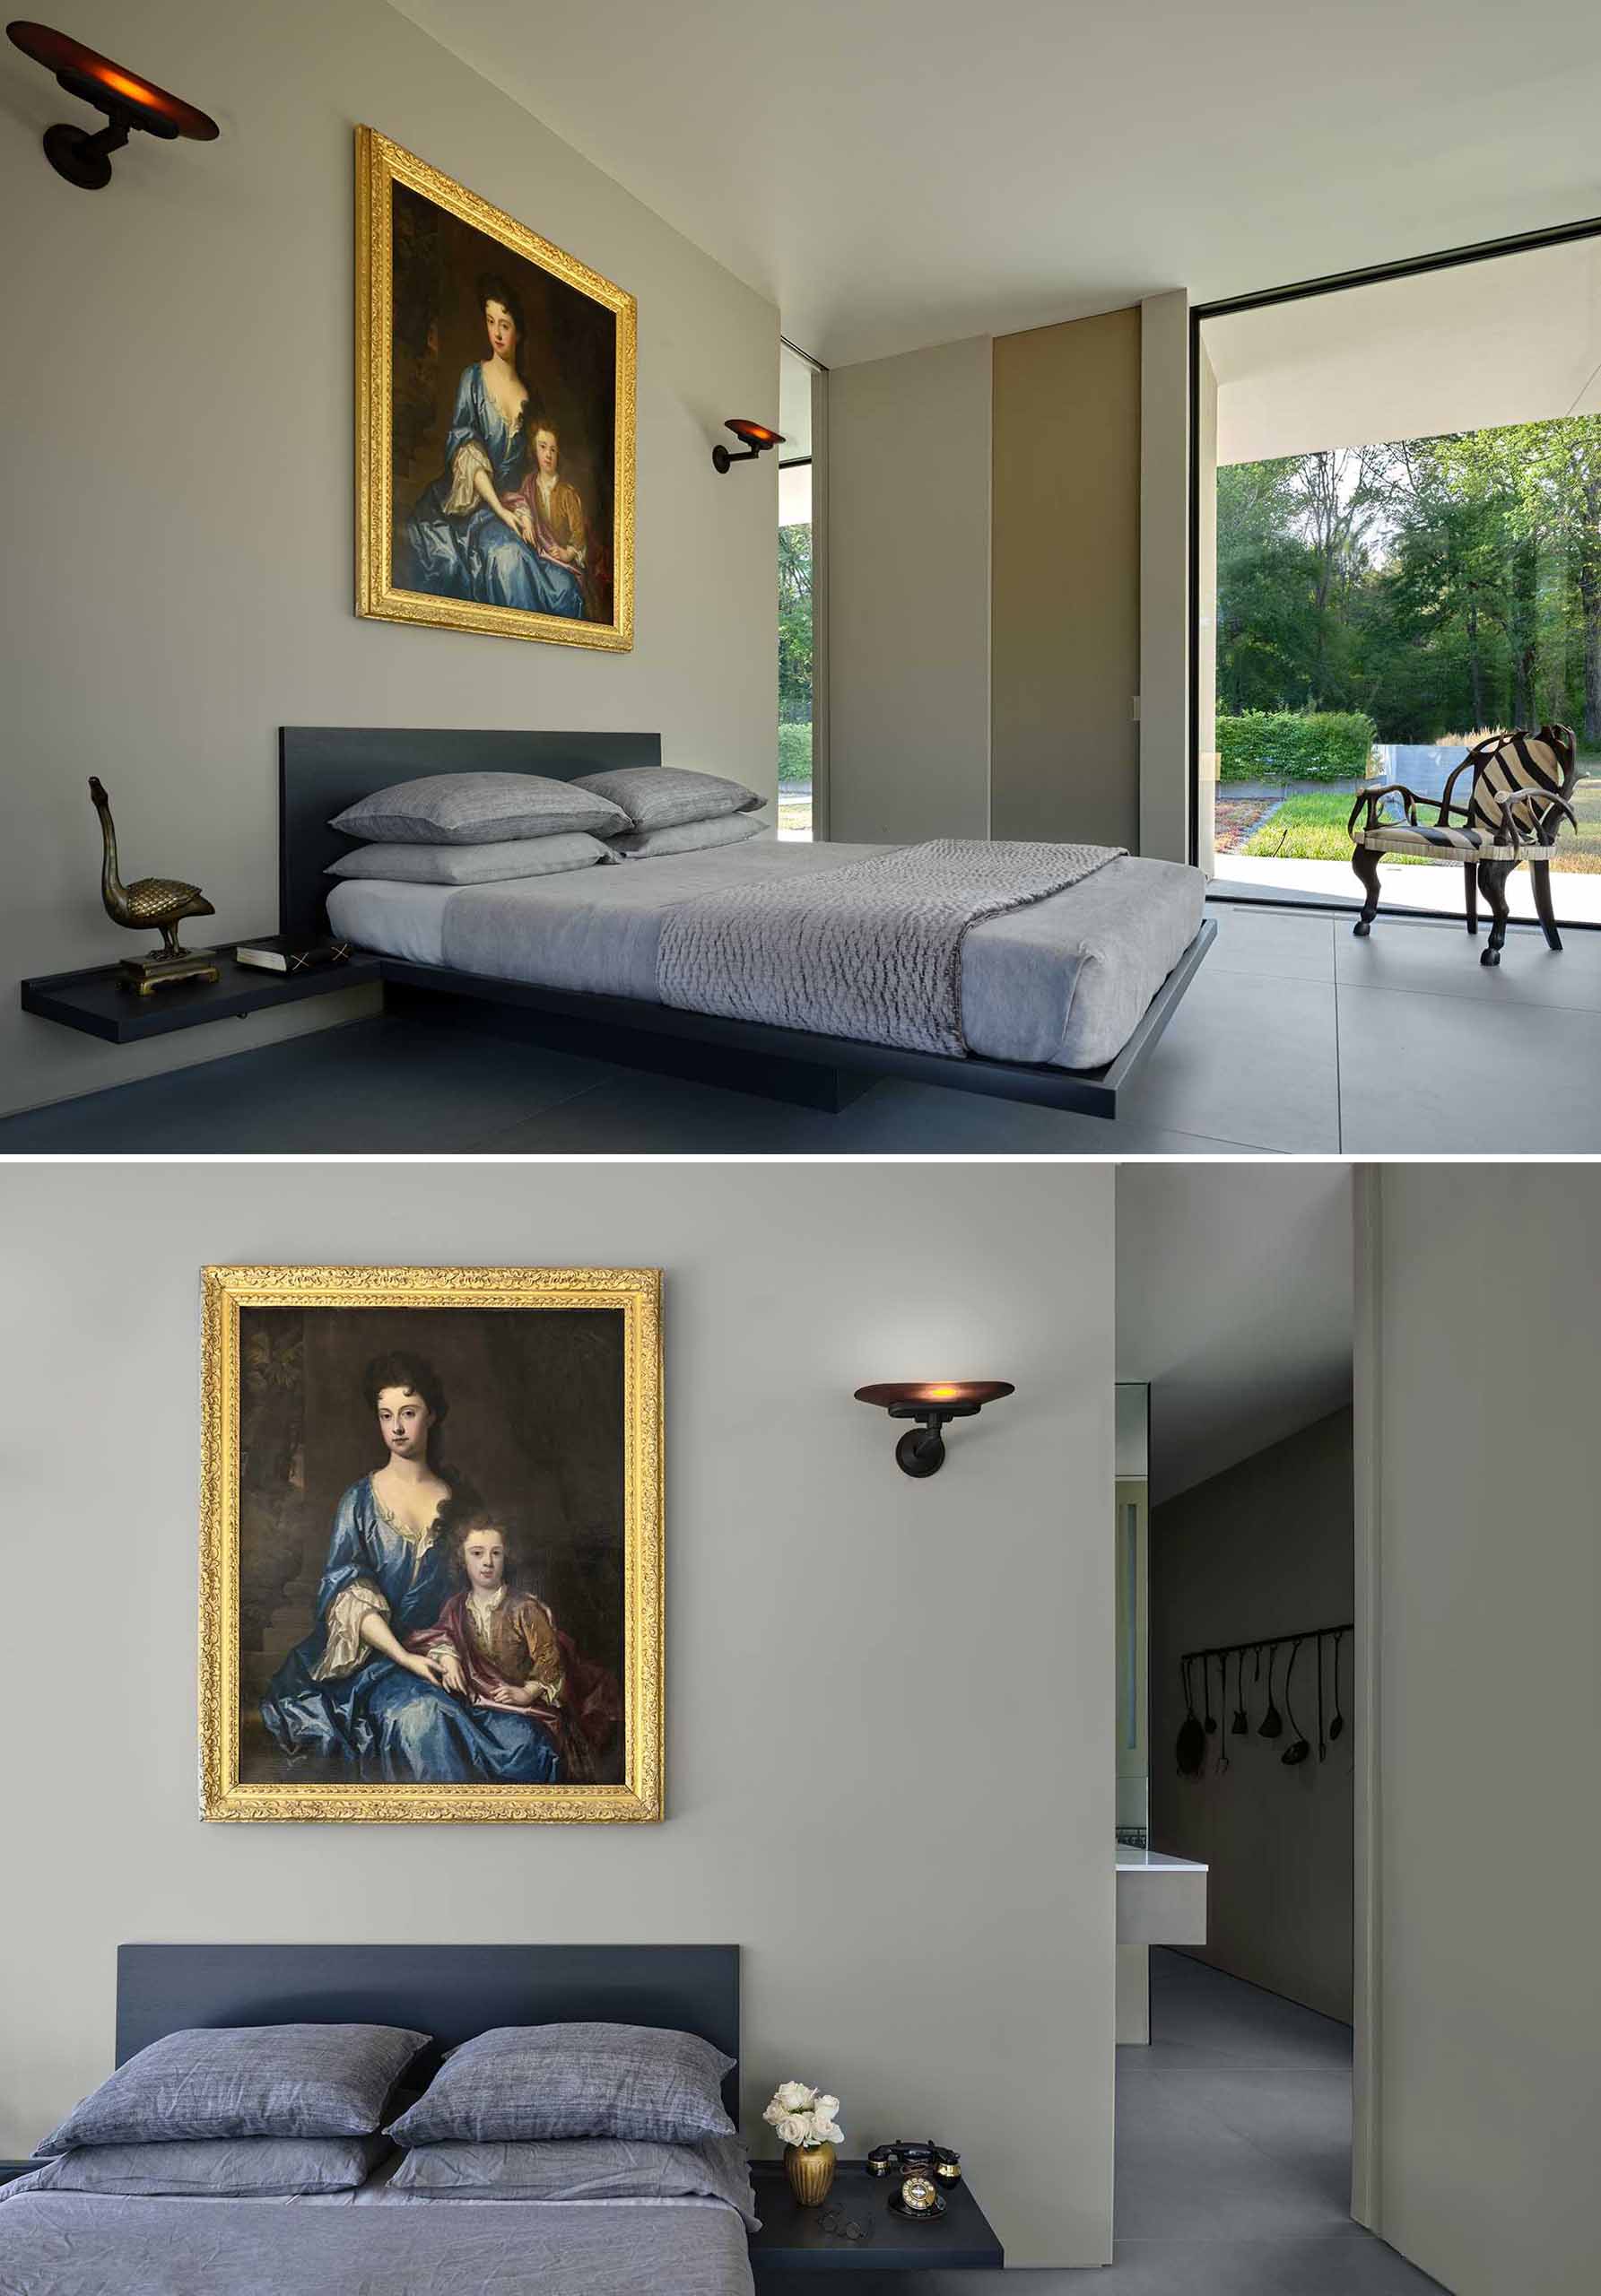 In this primary bedroom, the floating bed and bedside tables are subtle, while the artwork from the owner's collection draws attention.